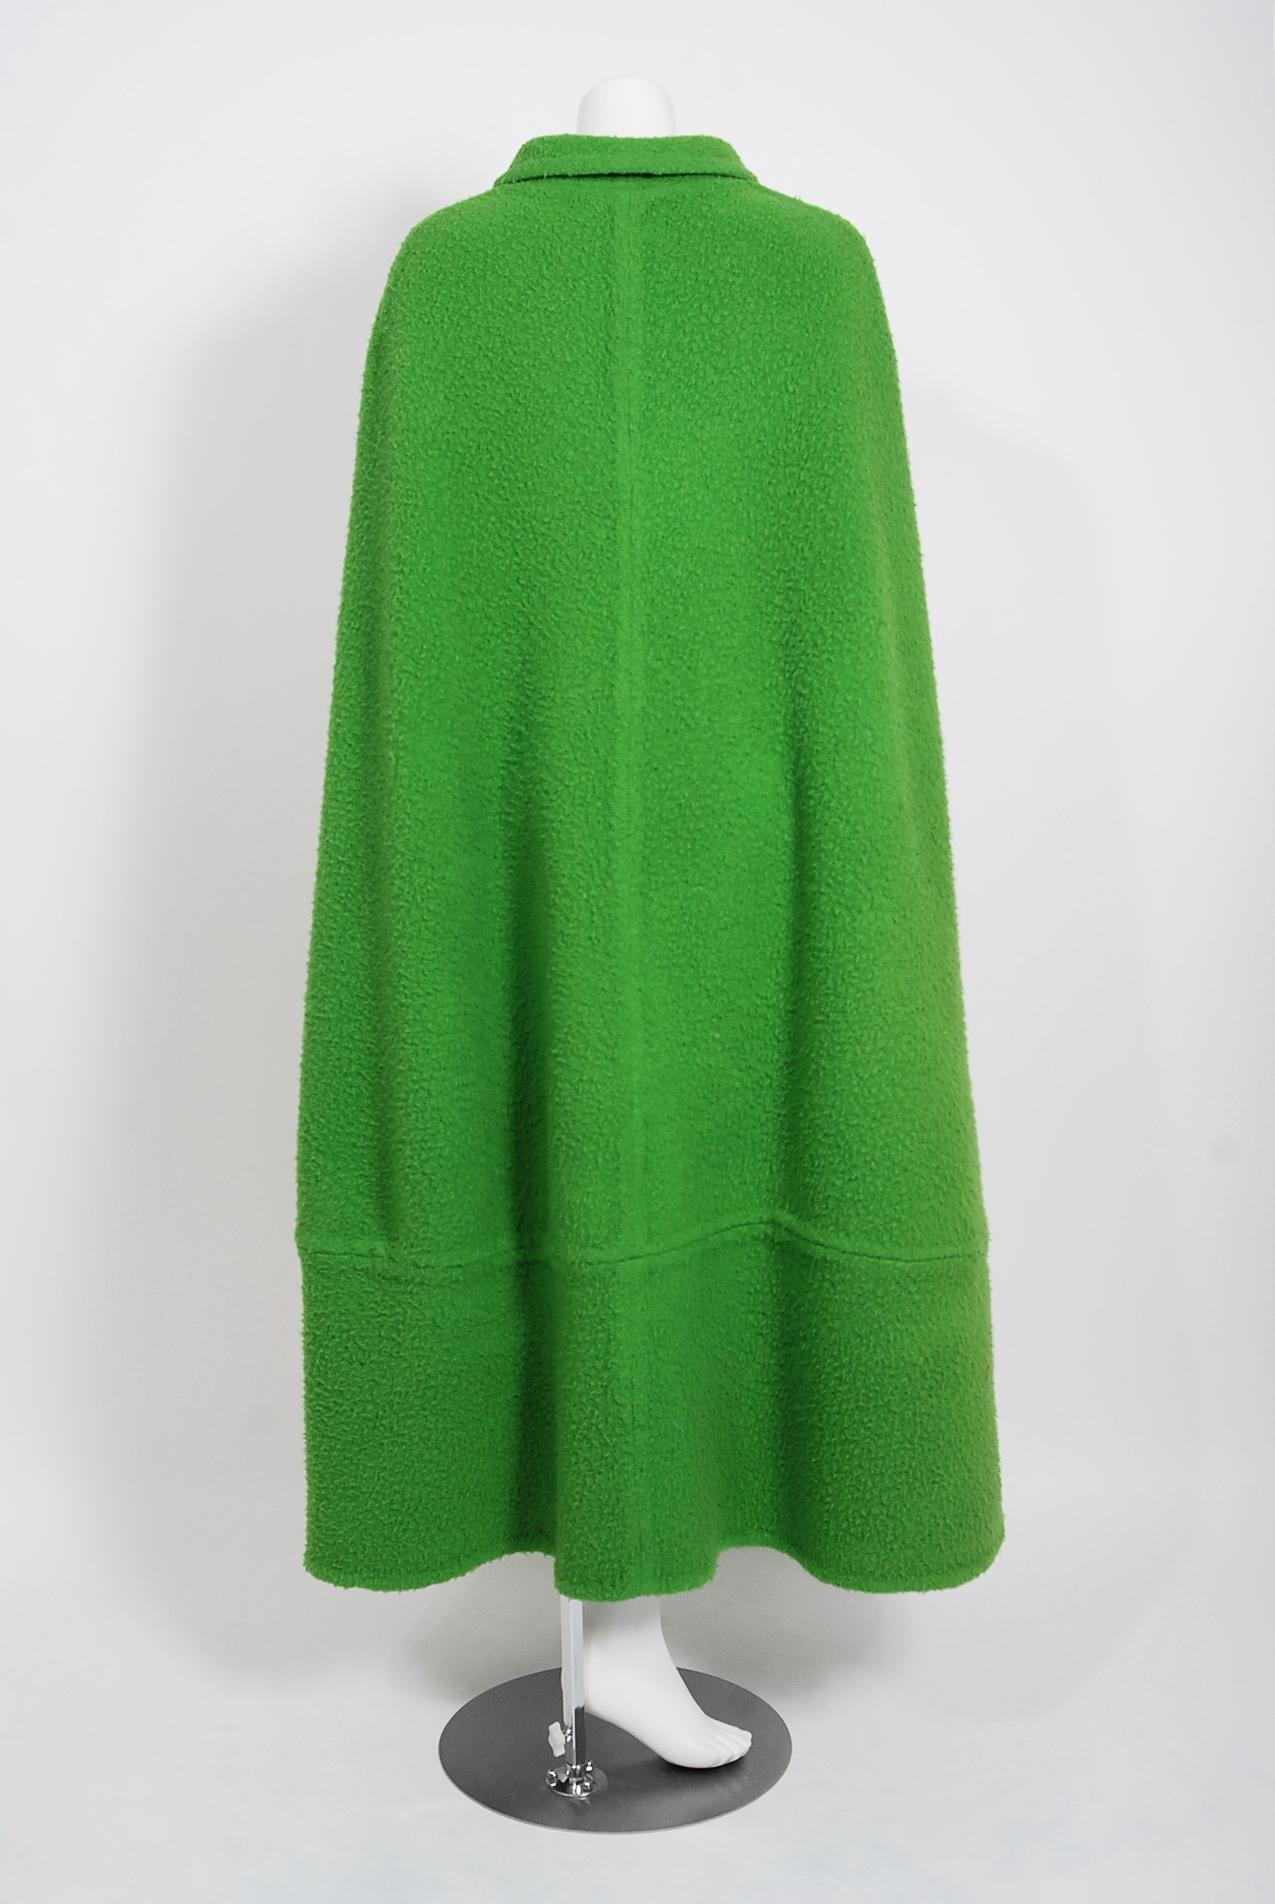 Vintage 1966 Christian Dior Haute-Couture Documented Green Wool Full-Length Cape 1